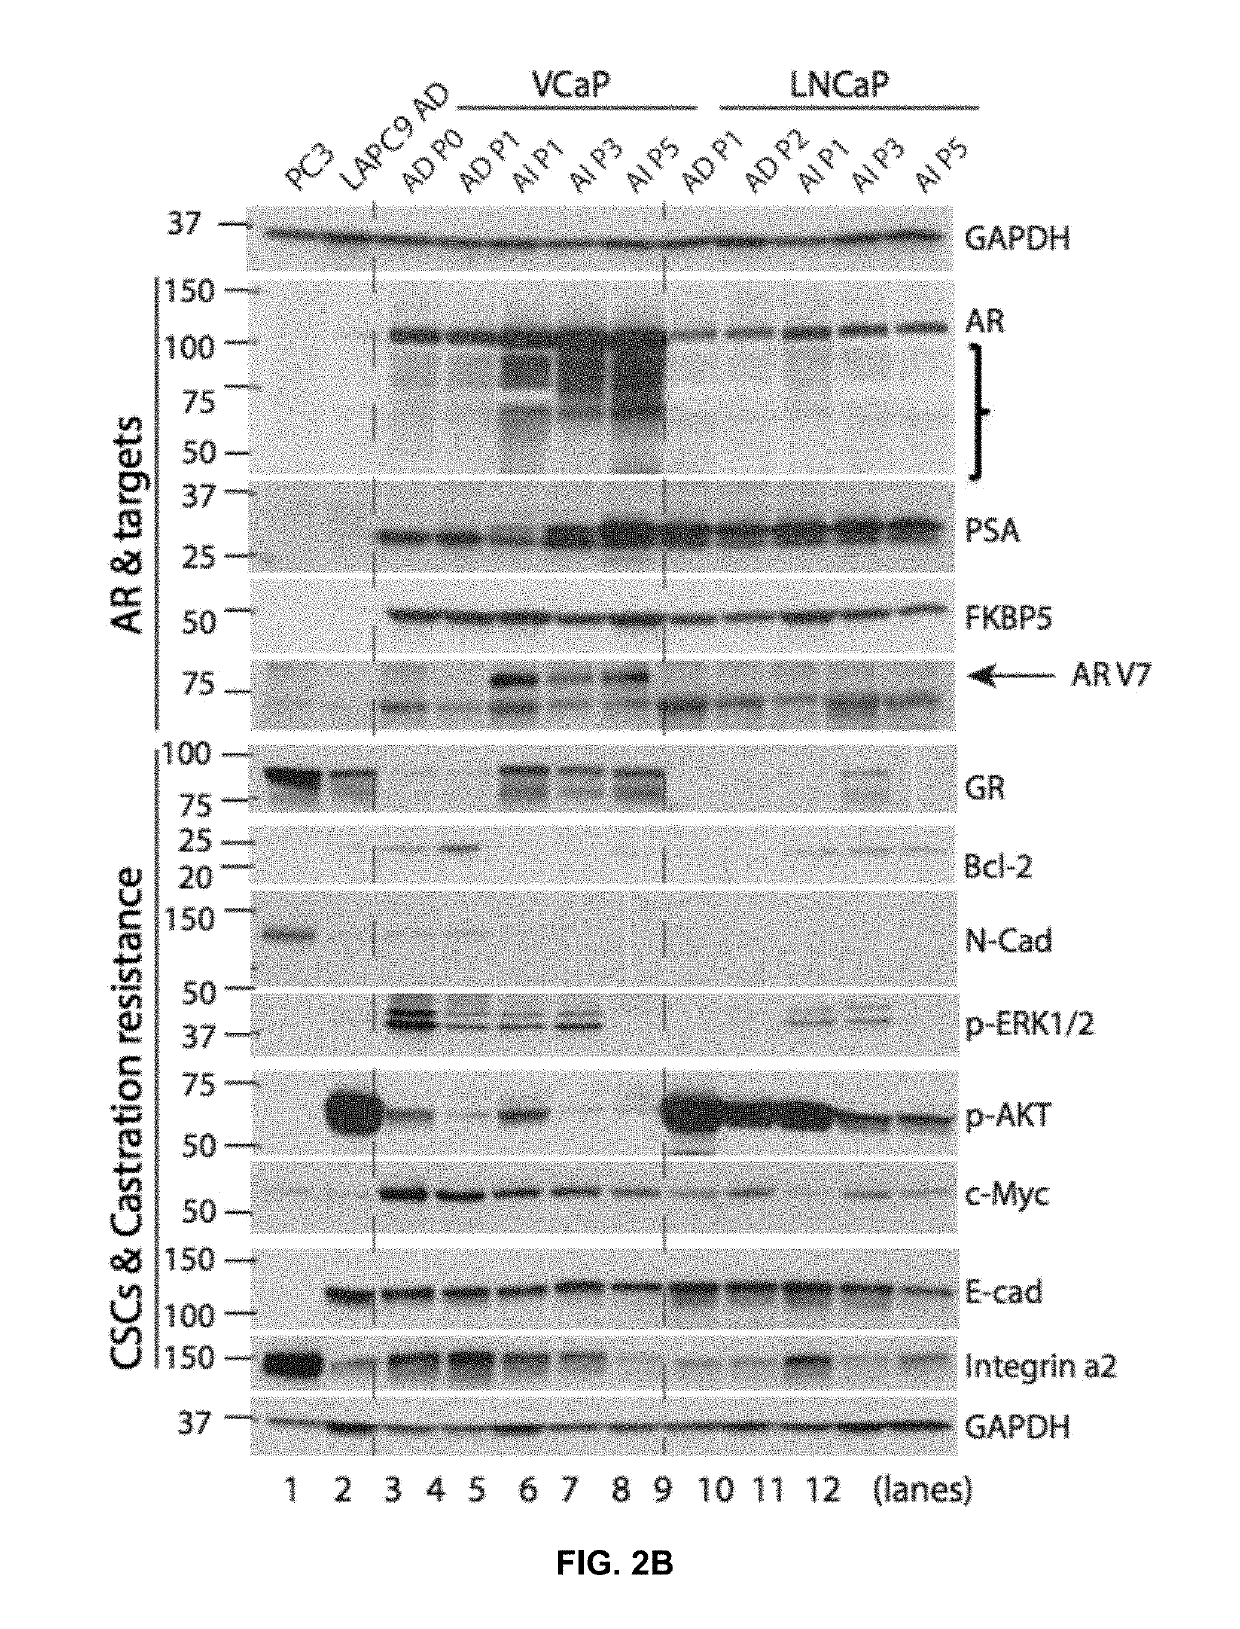 Formulations and methods for the treatment of cancers